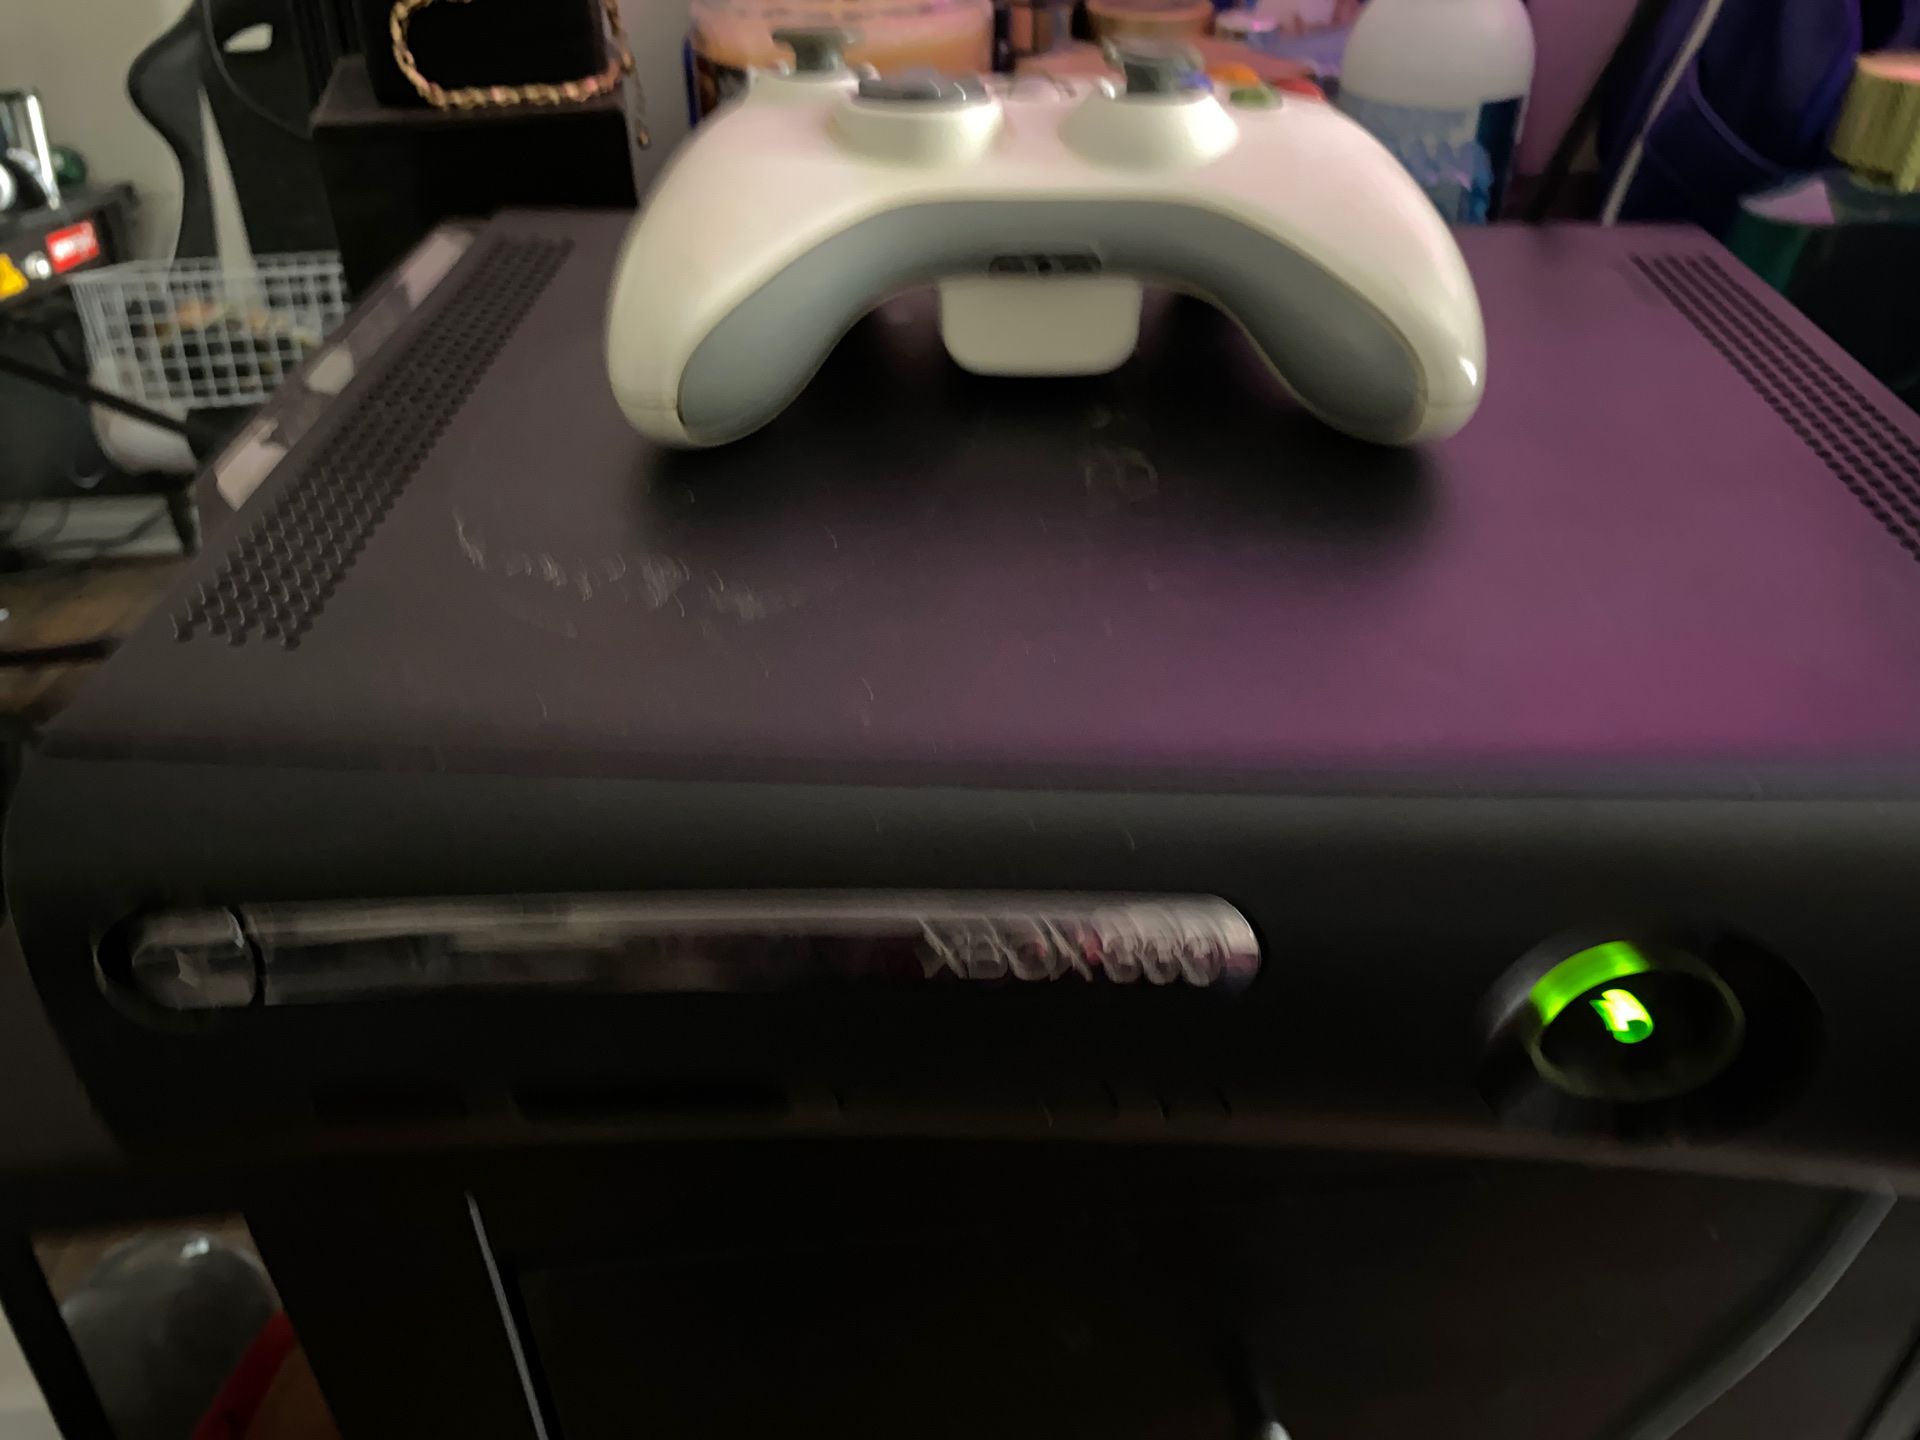 Xbox 360 120gb comes with games and controllers